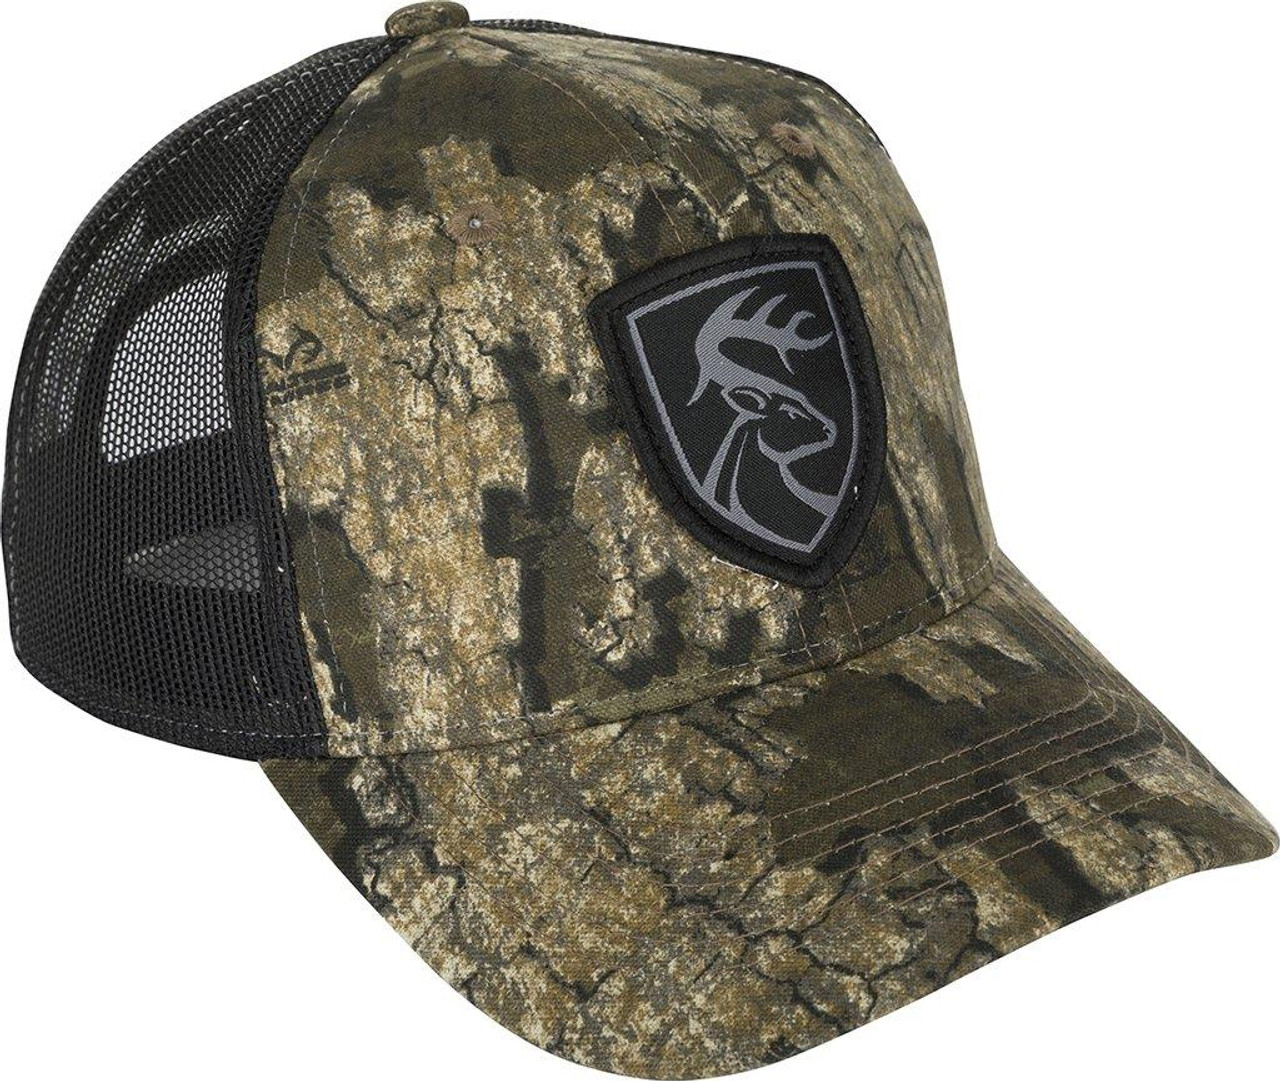 Drake Non-Typical Patch Logo Cap - Simmons Sporting Goods